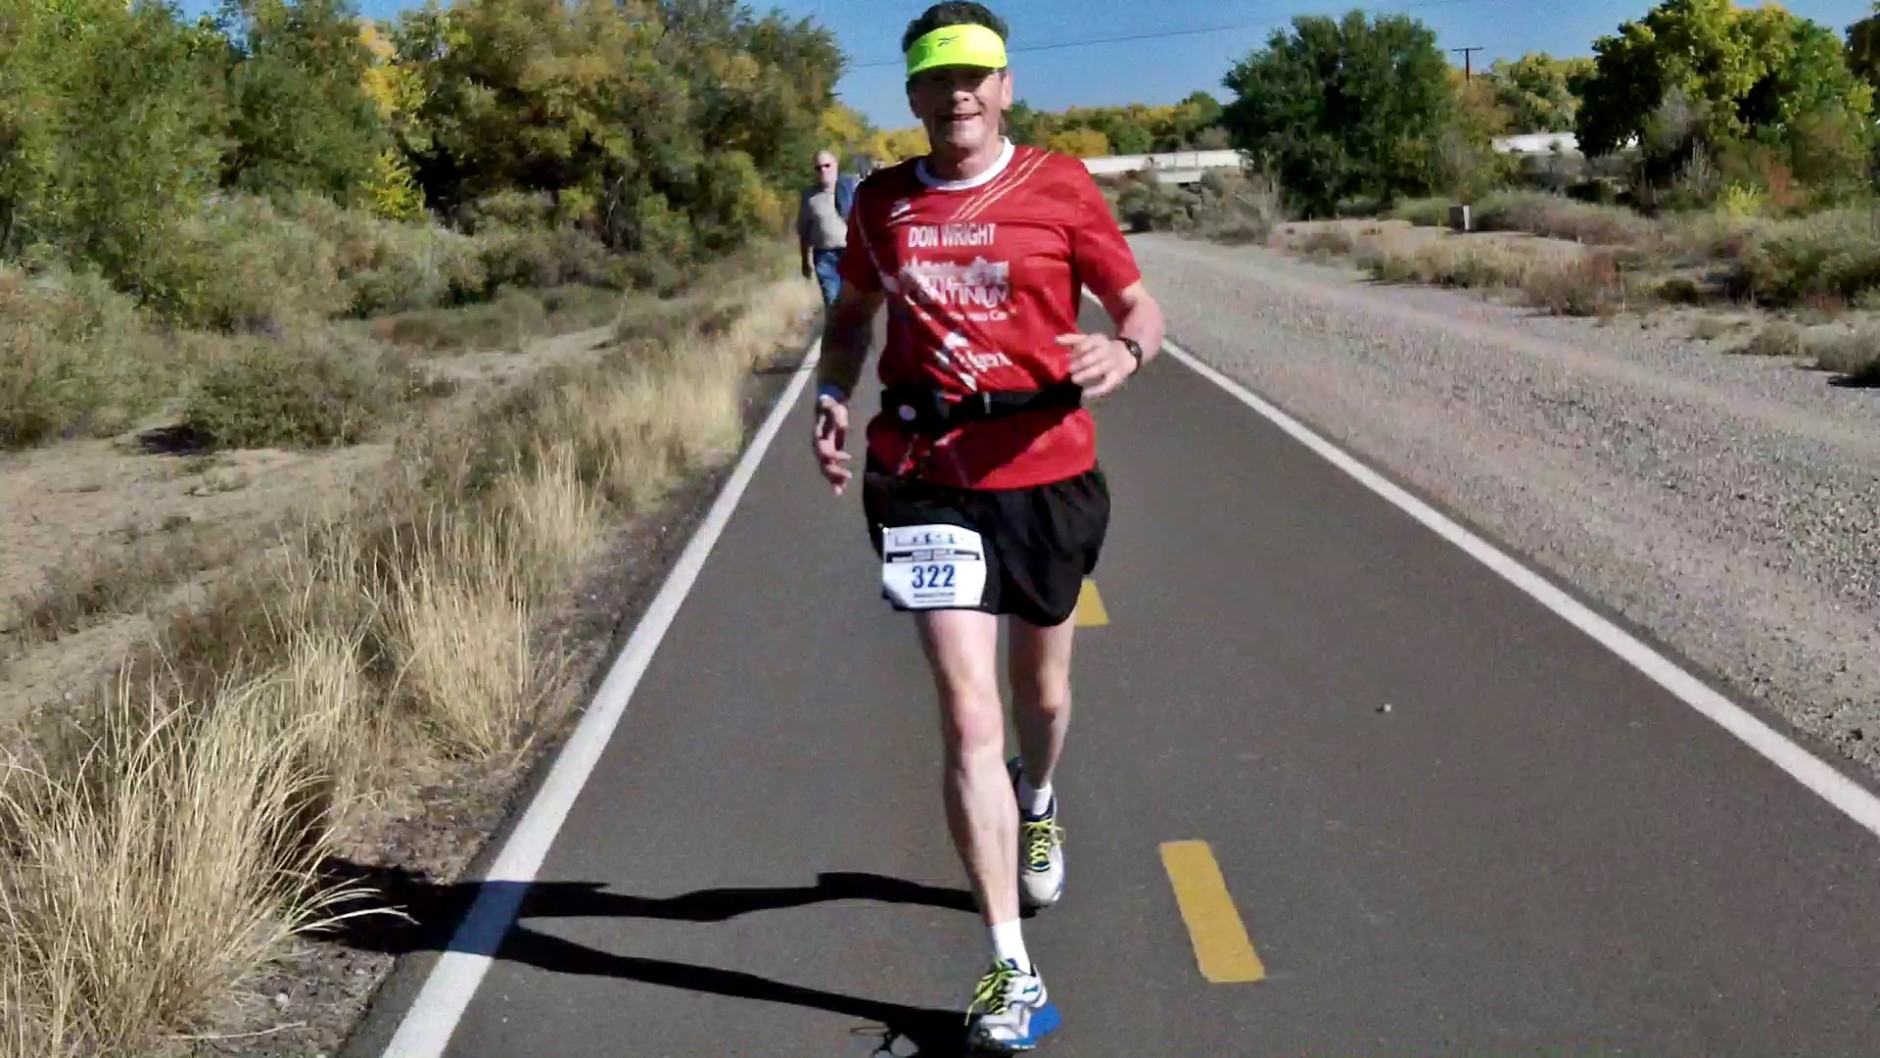 Here, Don Wright is seen running a marathon in Albuquerque in  October 2012. 